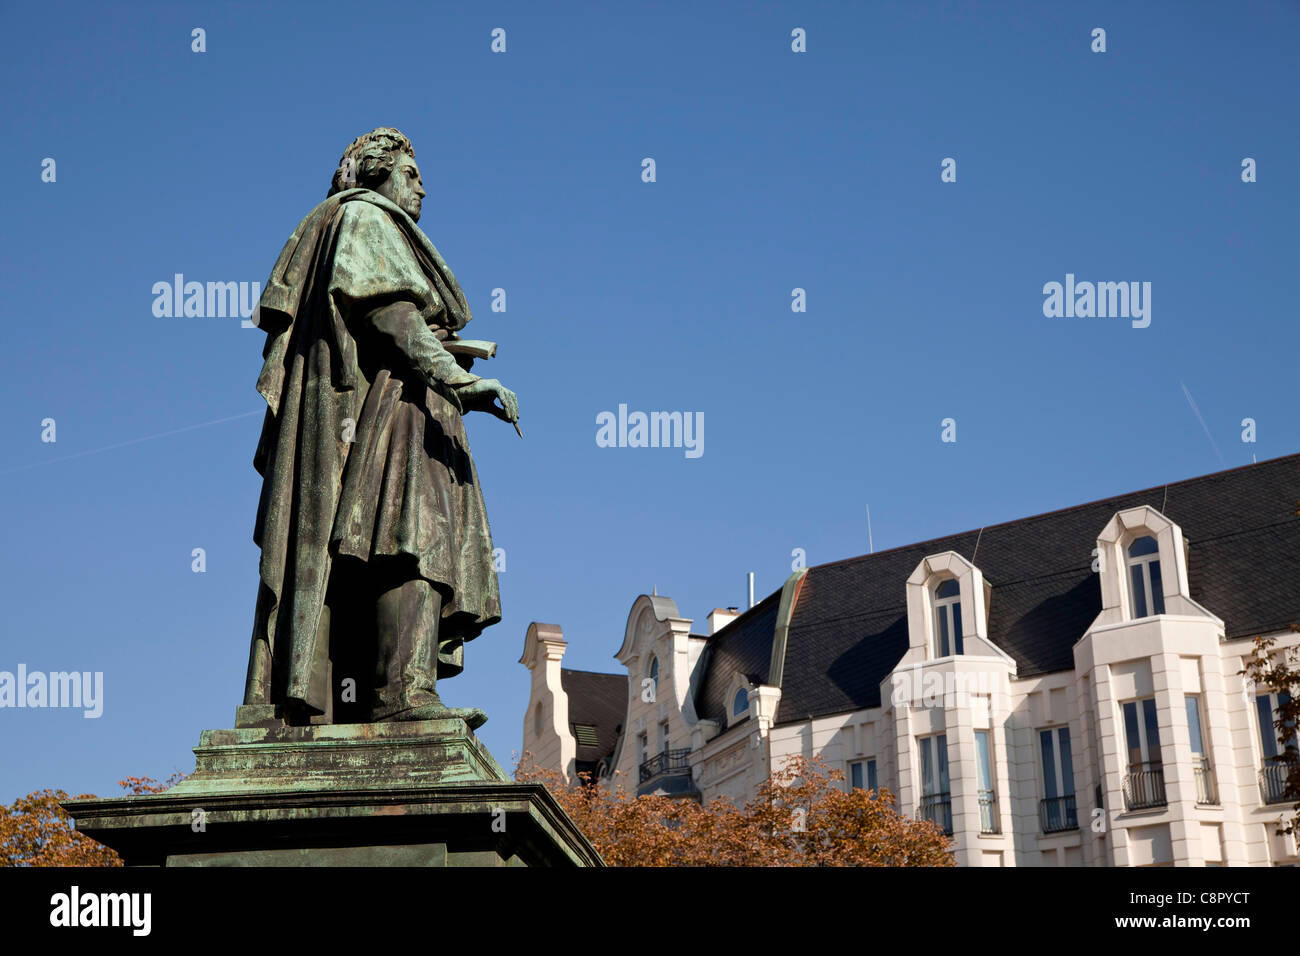 Beethoven monument on Muenster square in Bonn, North Rhine-Westphalia, Germany, Stock Photo